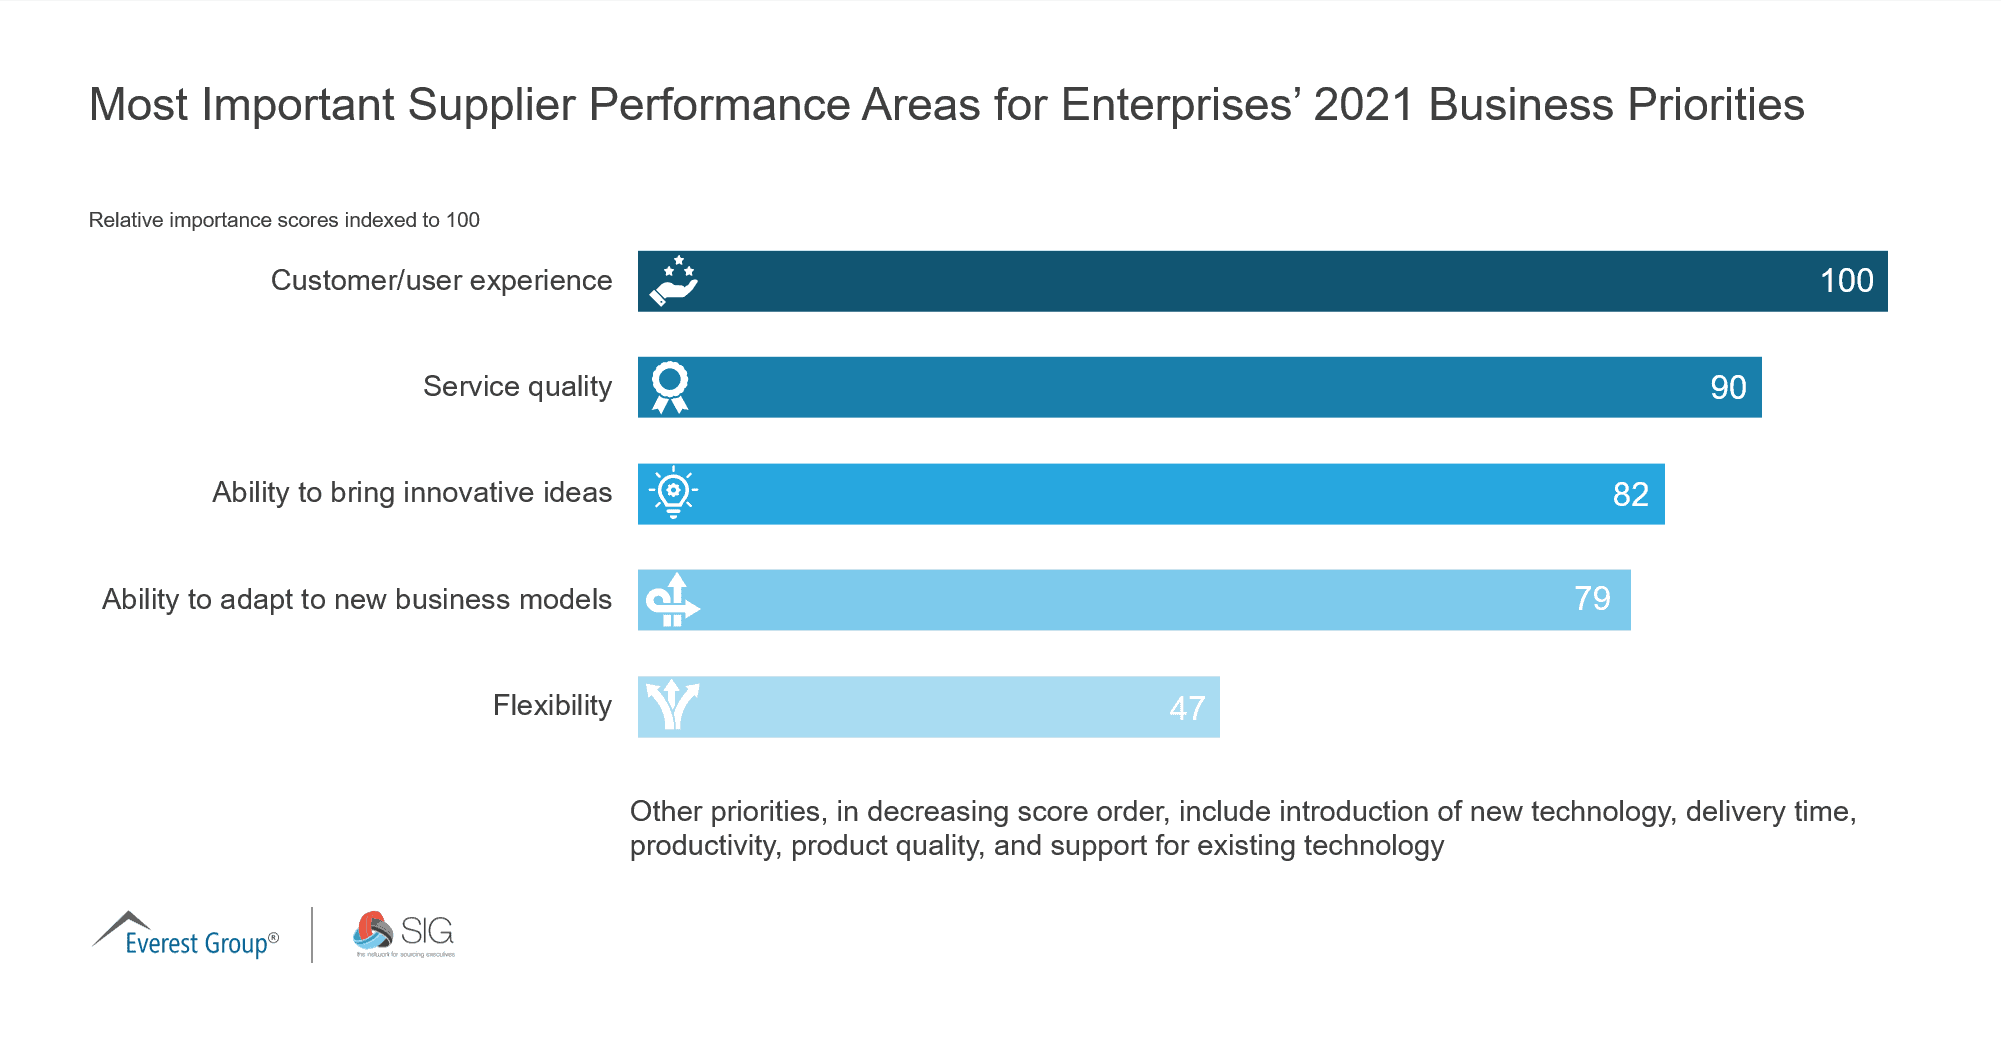 Most Important Supplier Performance Areas for Enterprises’ 2021 Business Priorities